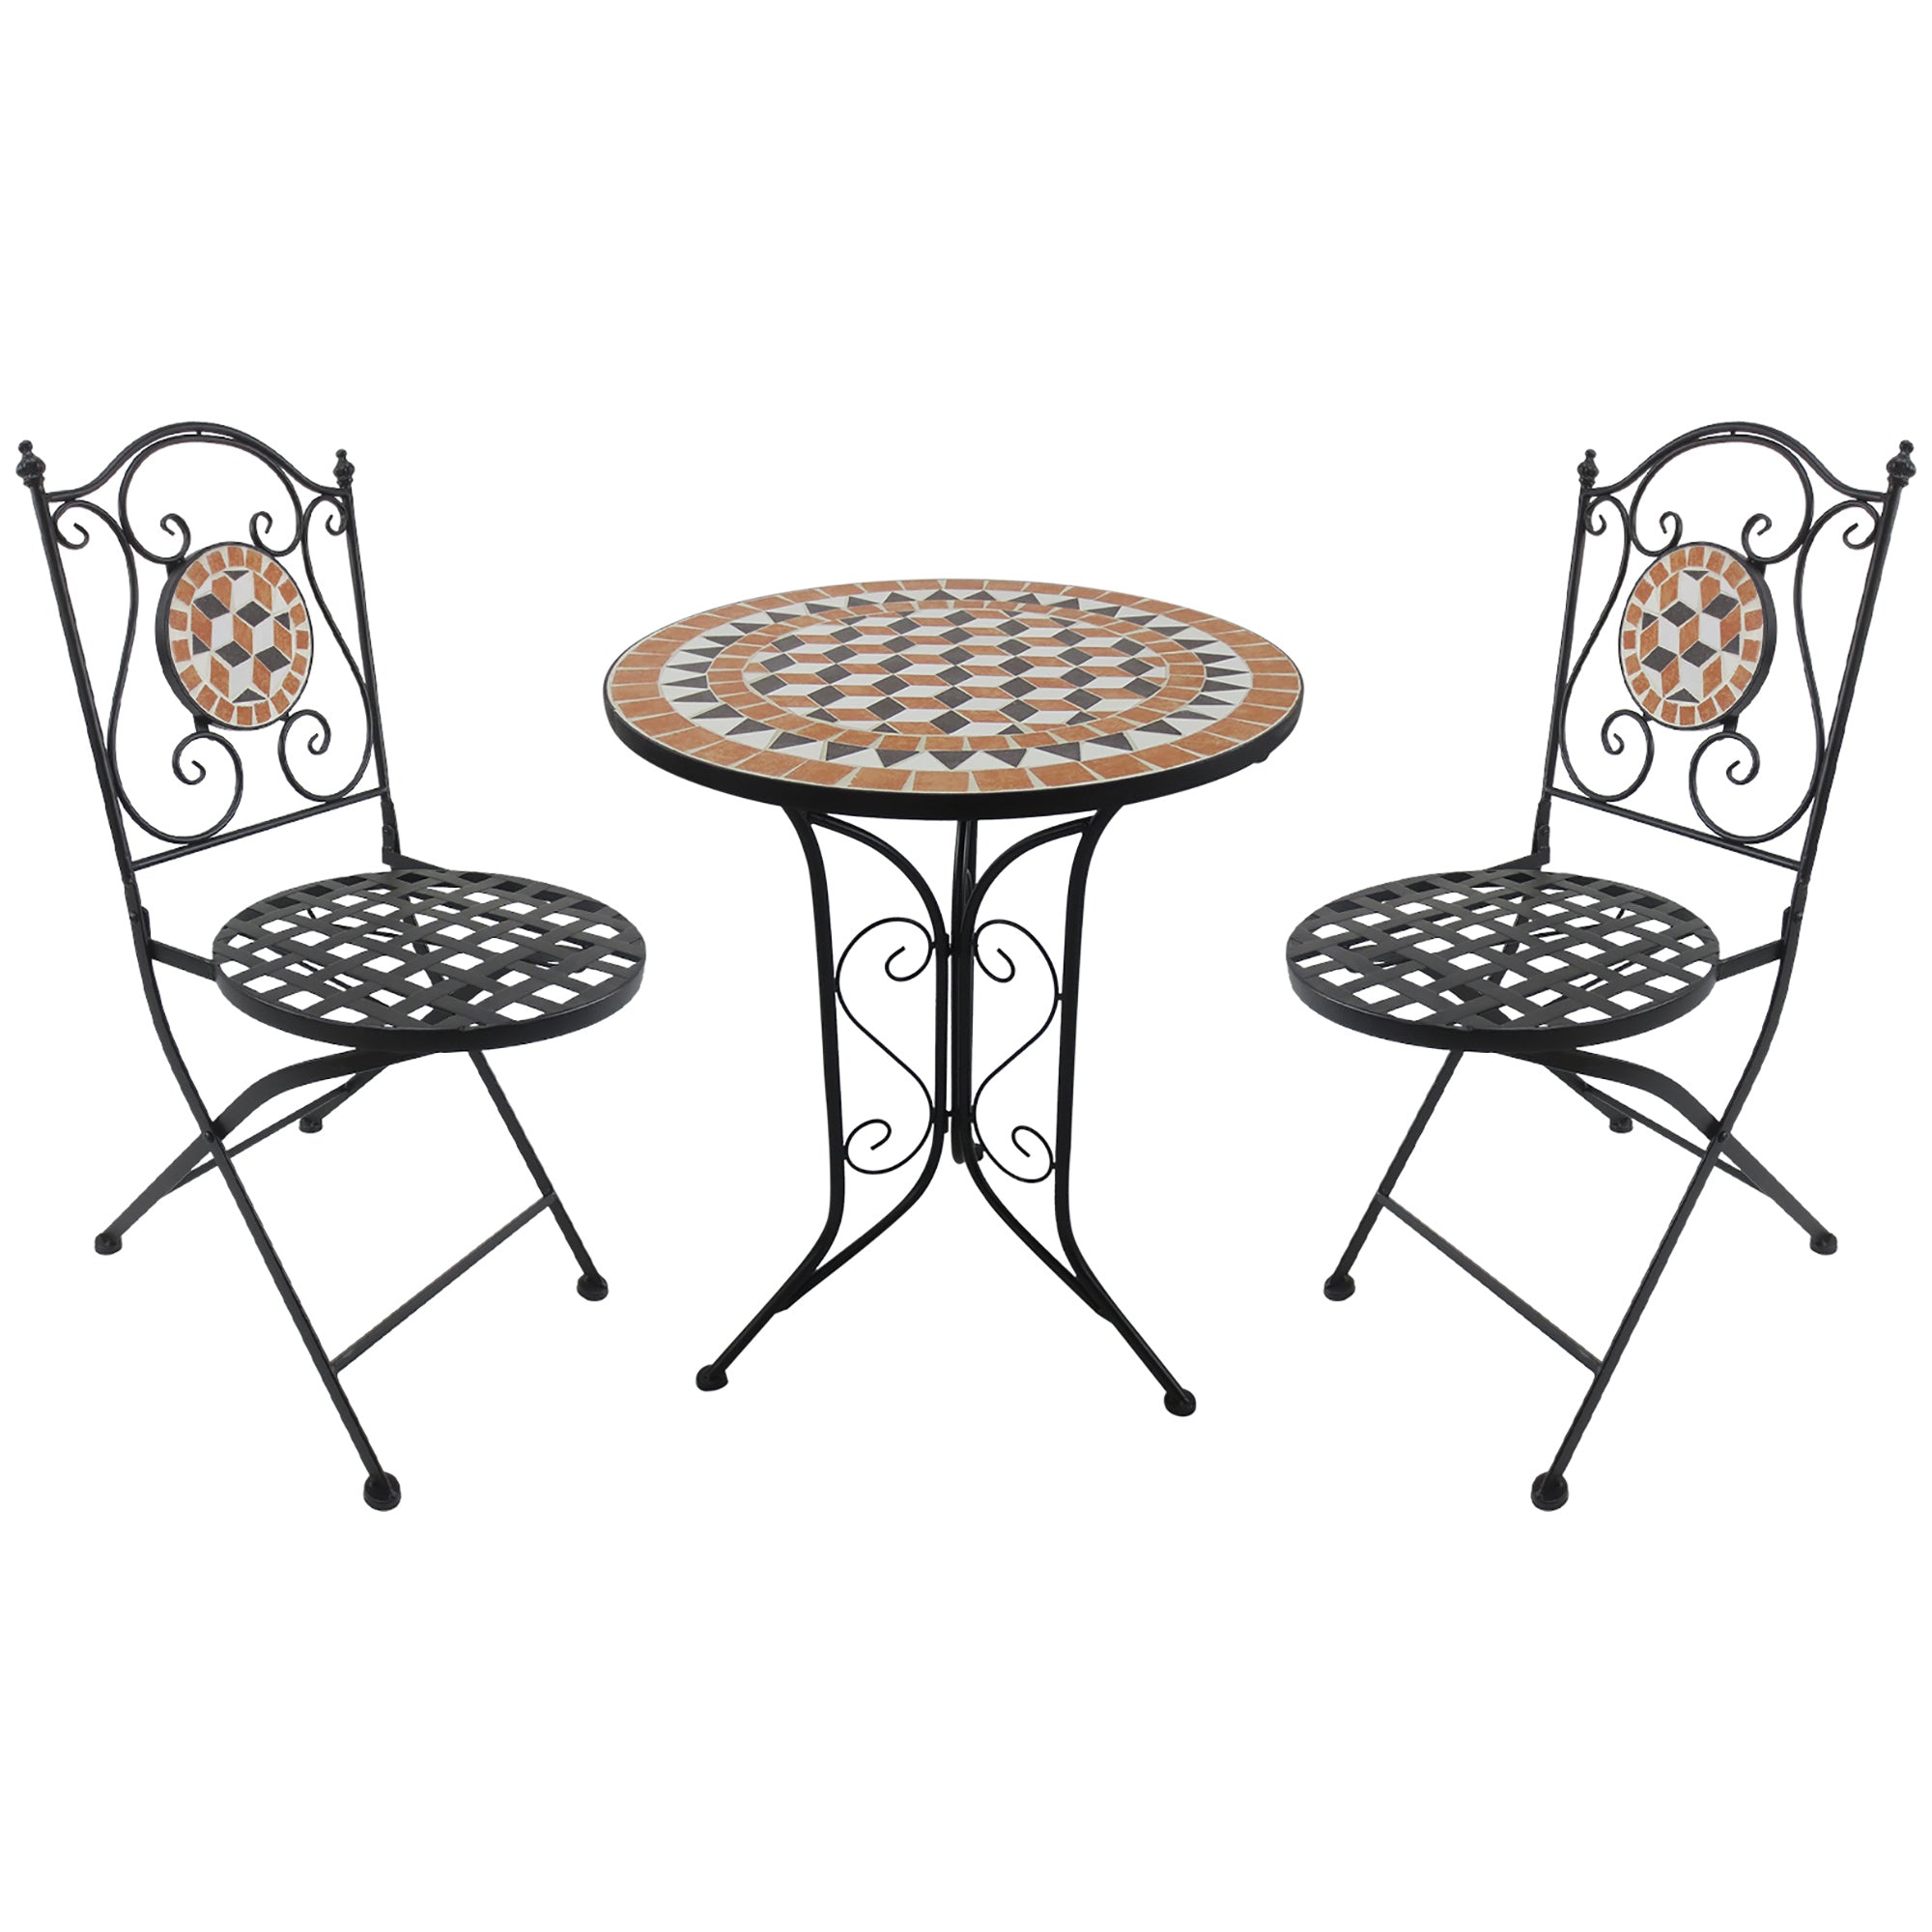 Outsunny 3 Pcs Mosaic Bistro Table Chair Set Patio Garden Dining Furniture  | TJ Hughes